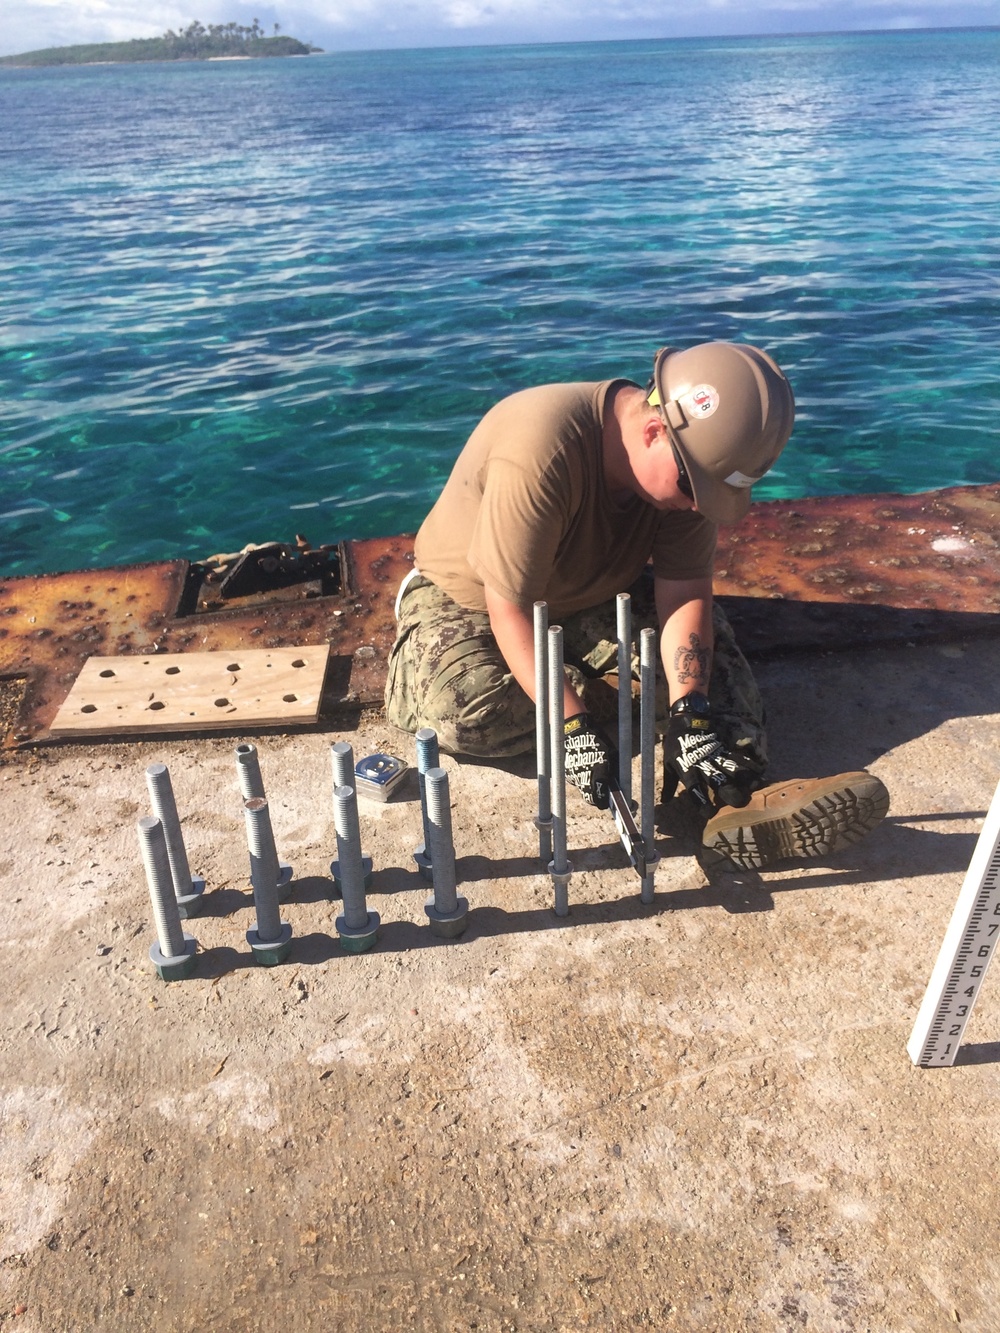 Seabees Build PEB in Marshall Islands